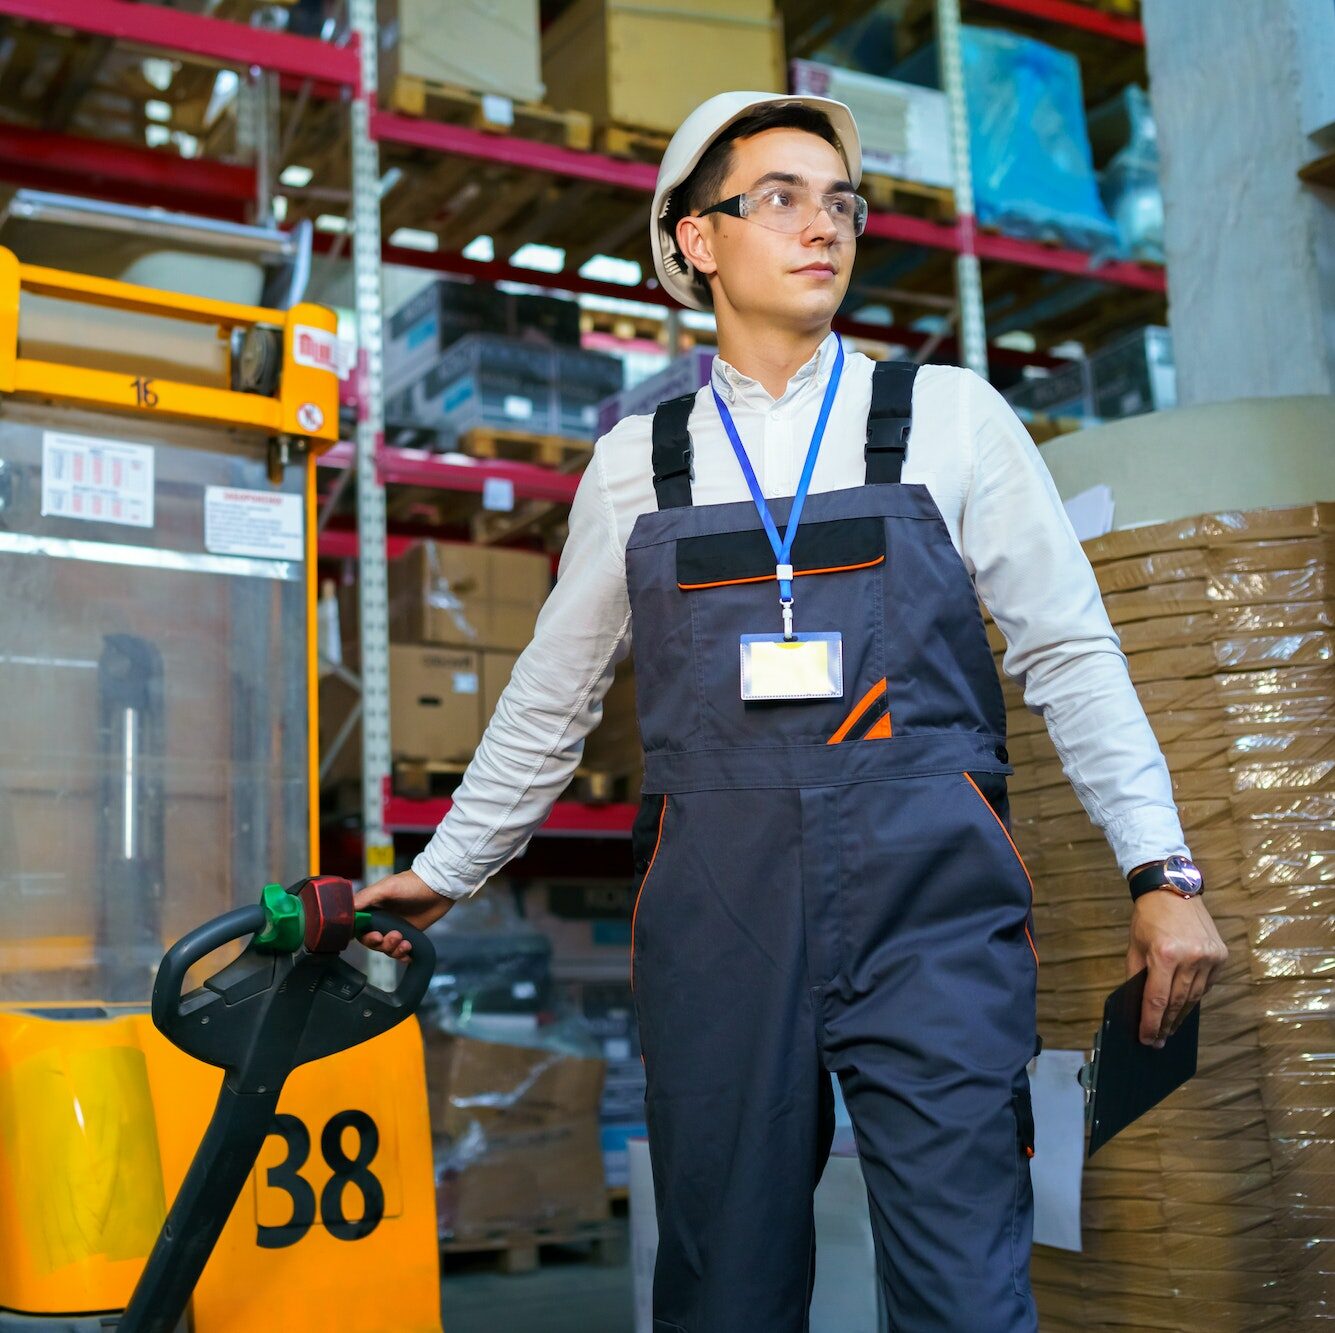 Man works in a warehouse with a forklift